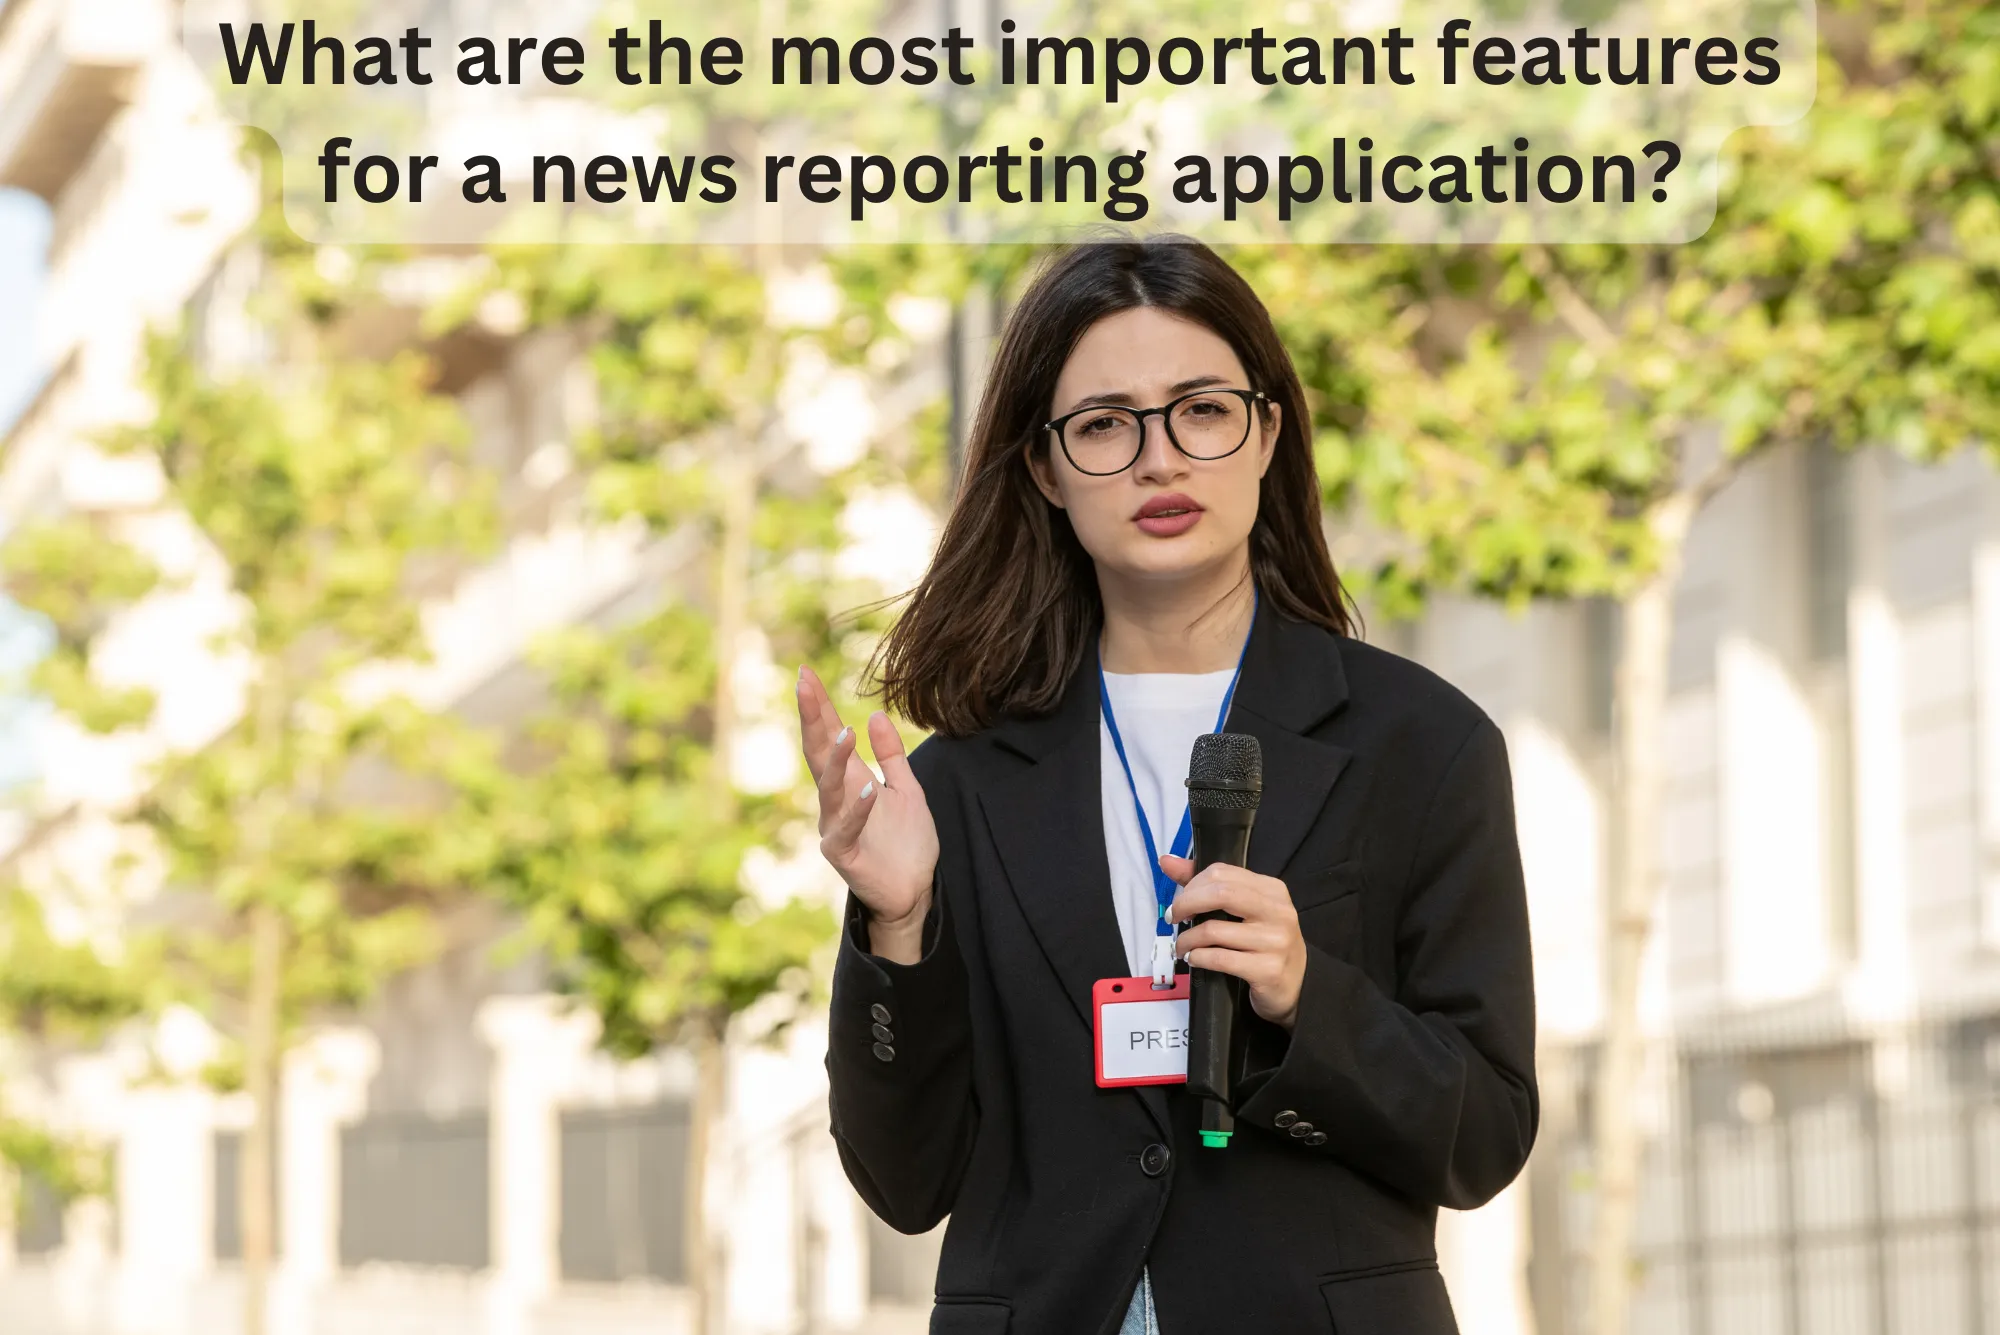 Most important features for a news reporting application